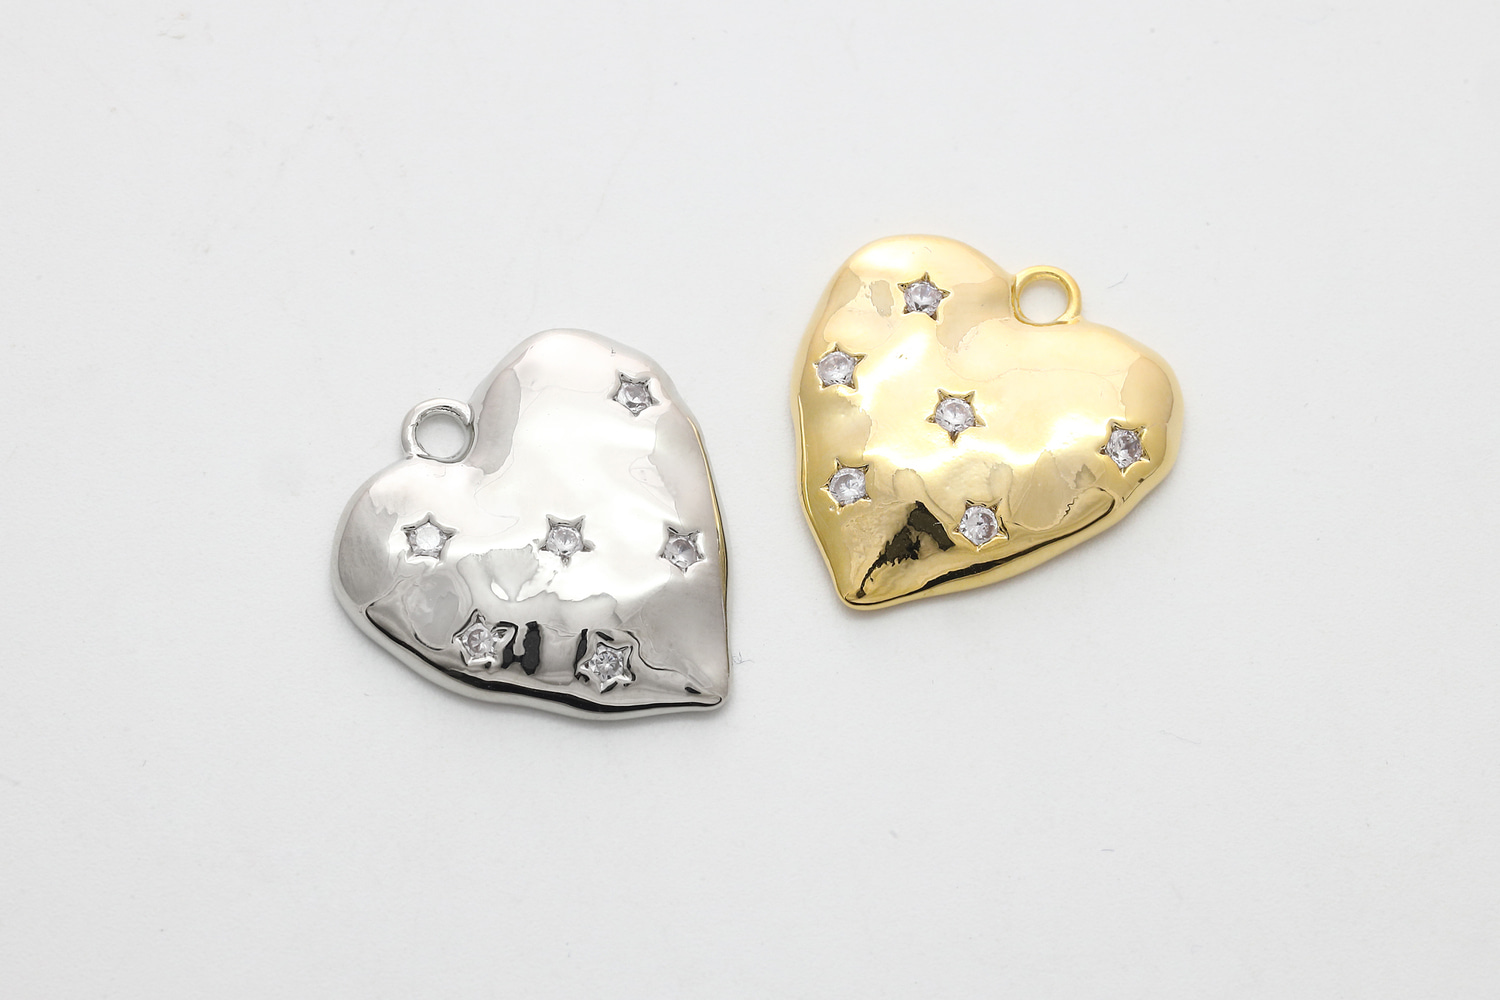 [Q18-VC3] Hammered heart cubic pendant, Brass, Cubic zirconia, Nickel free, Heart pendant, Unique charm, Jewelry making supplies, 1 piece (Q18-R1, Q18-R1R)